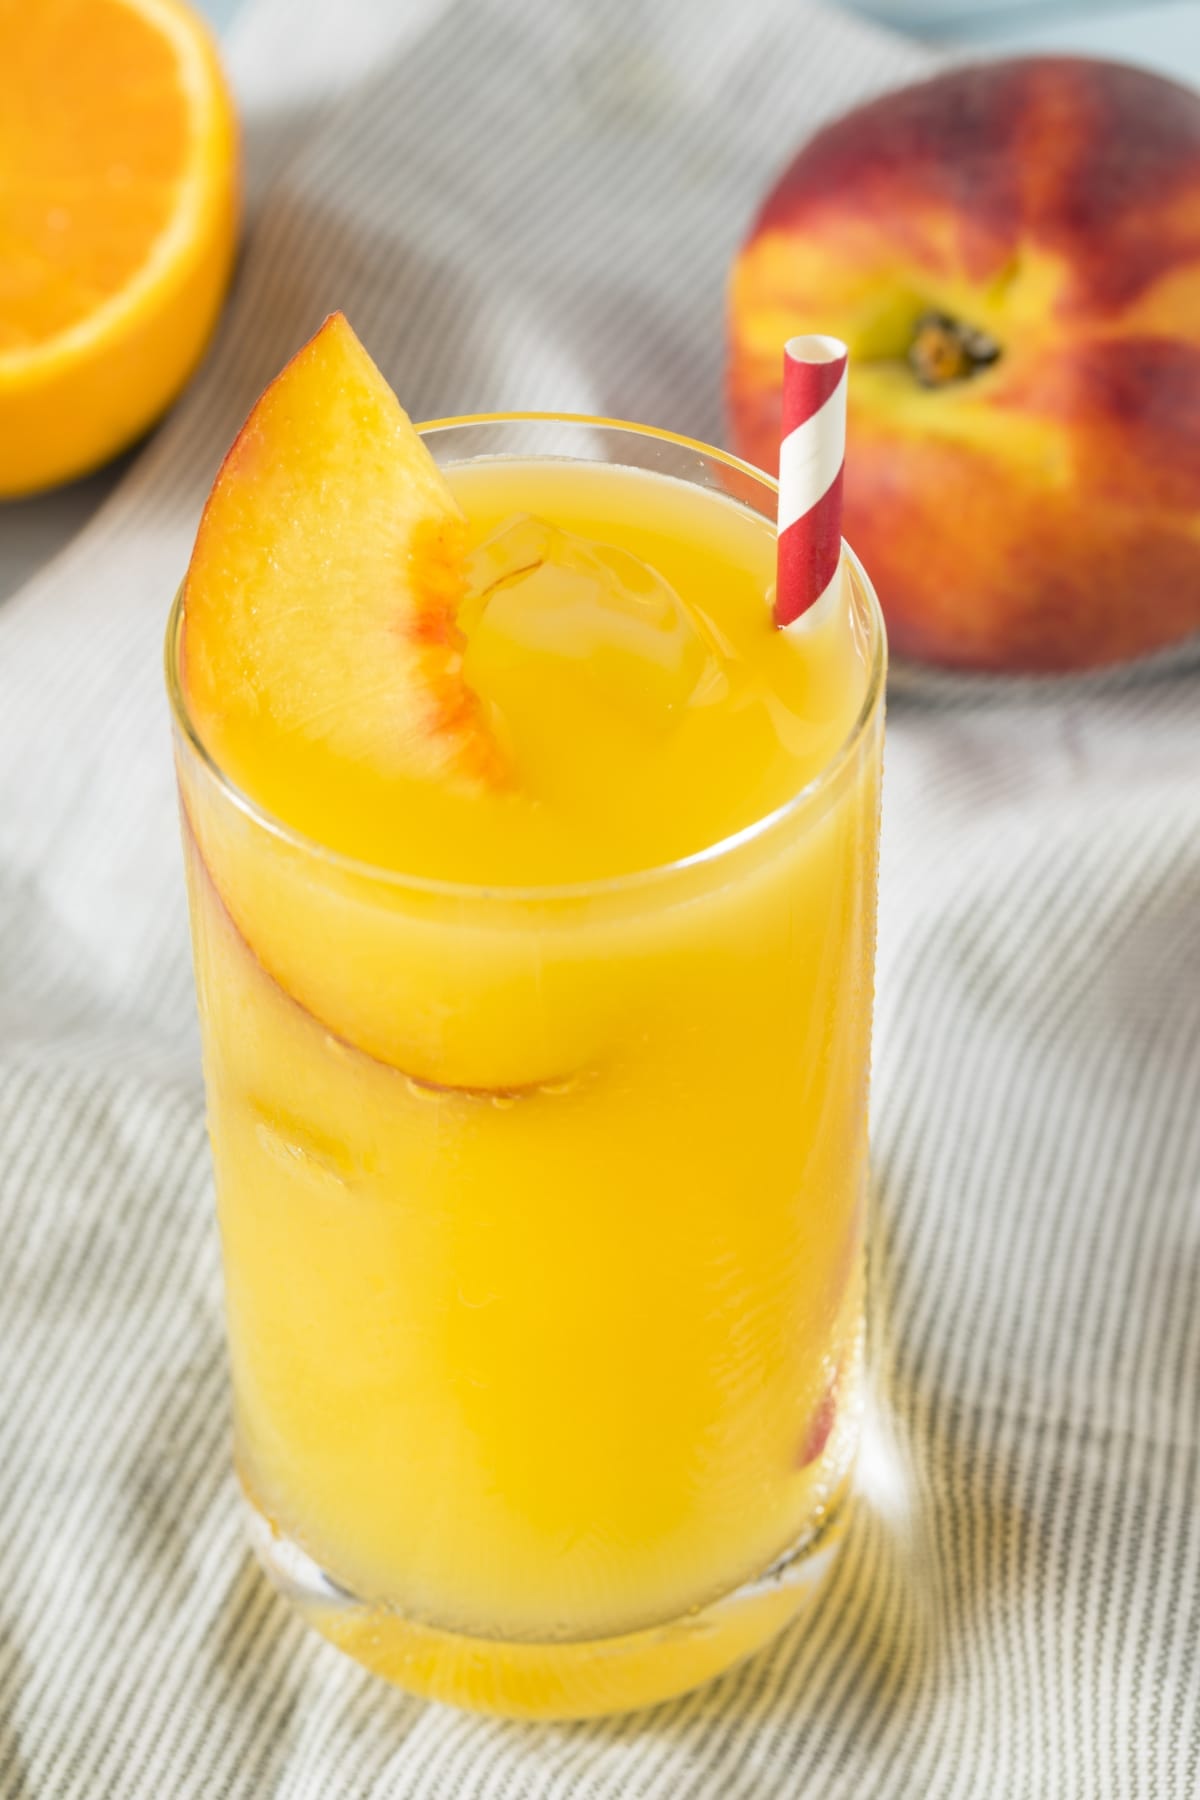 Refreshing Fuzzy Navel Cocktail Garnished With Slice of Peach